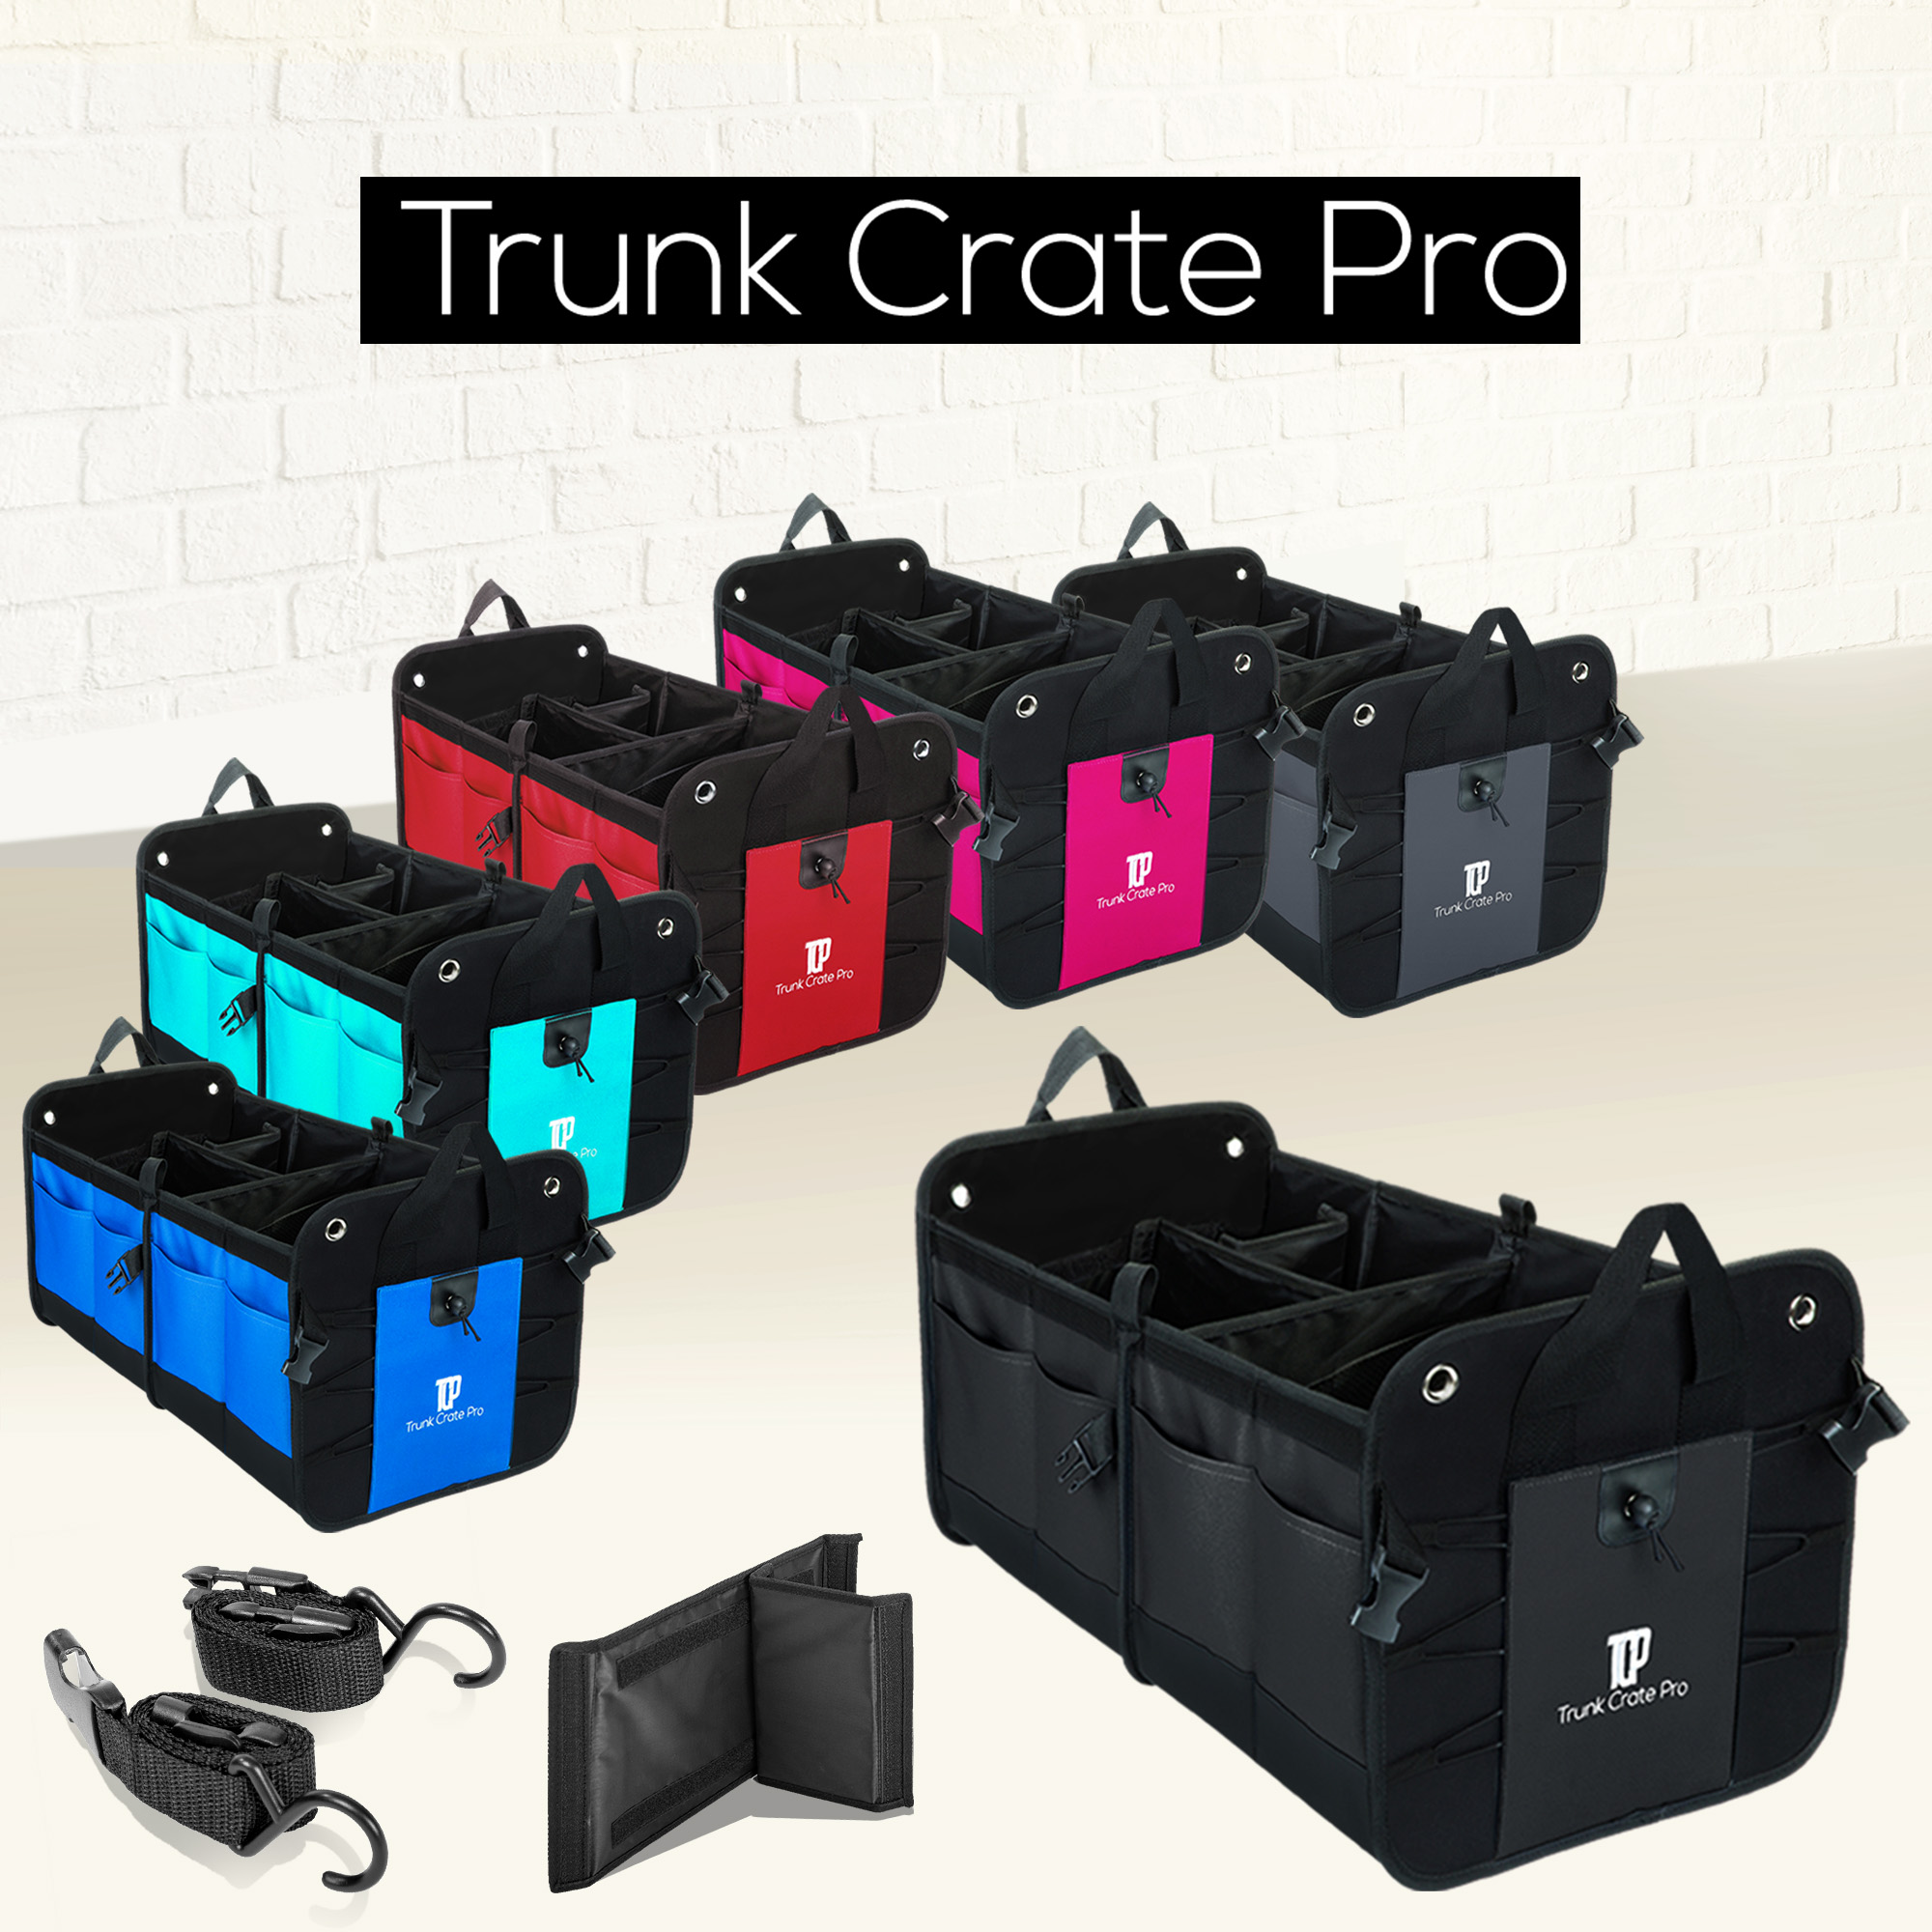 Portable Trunkcratepro Collapsible Multi Compartments Trunk Organizer